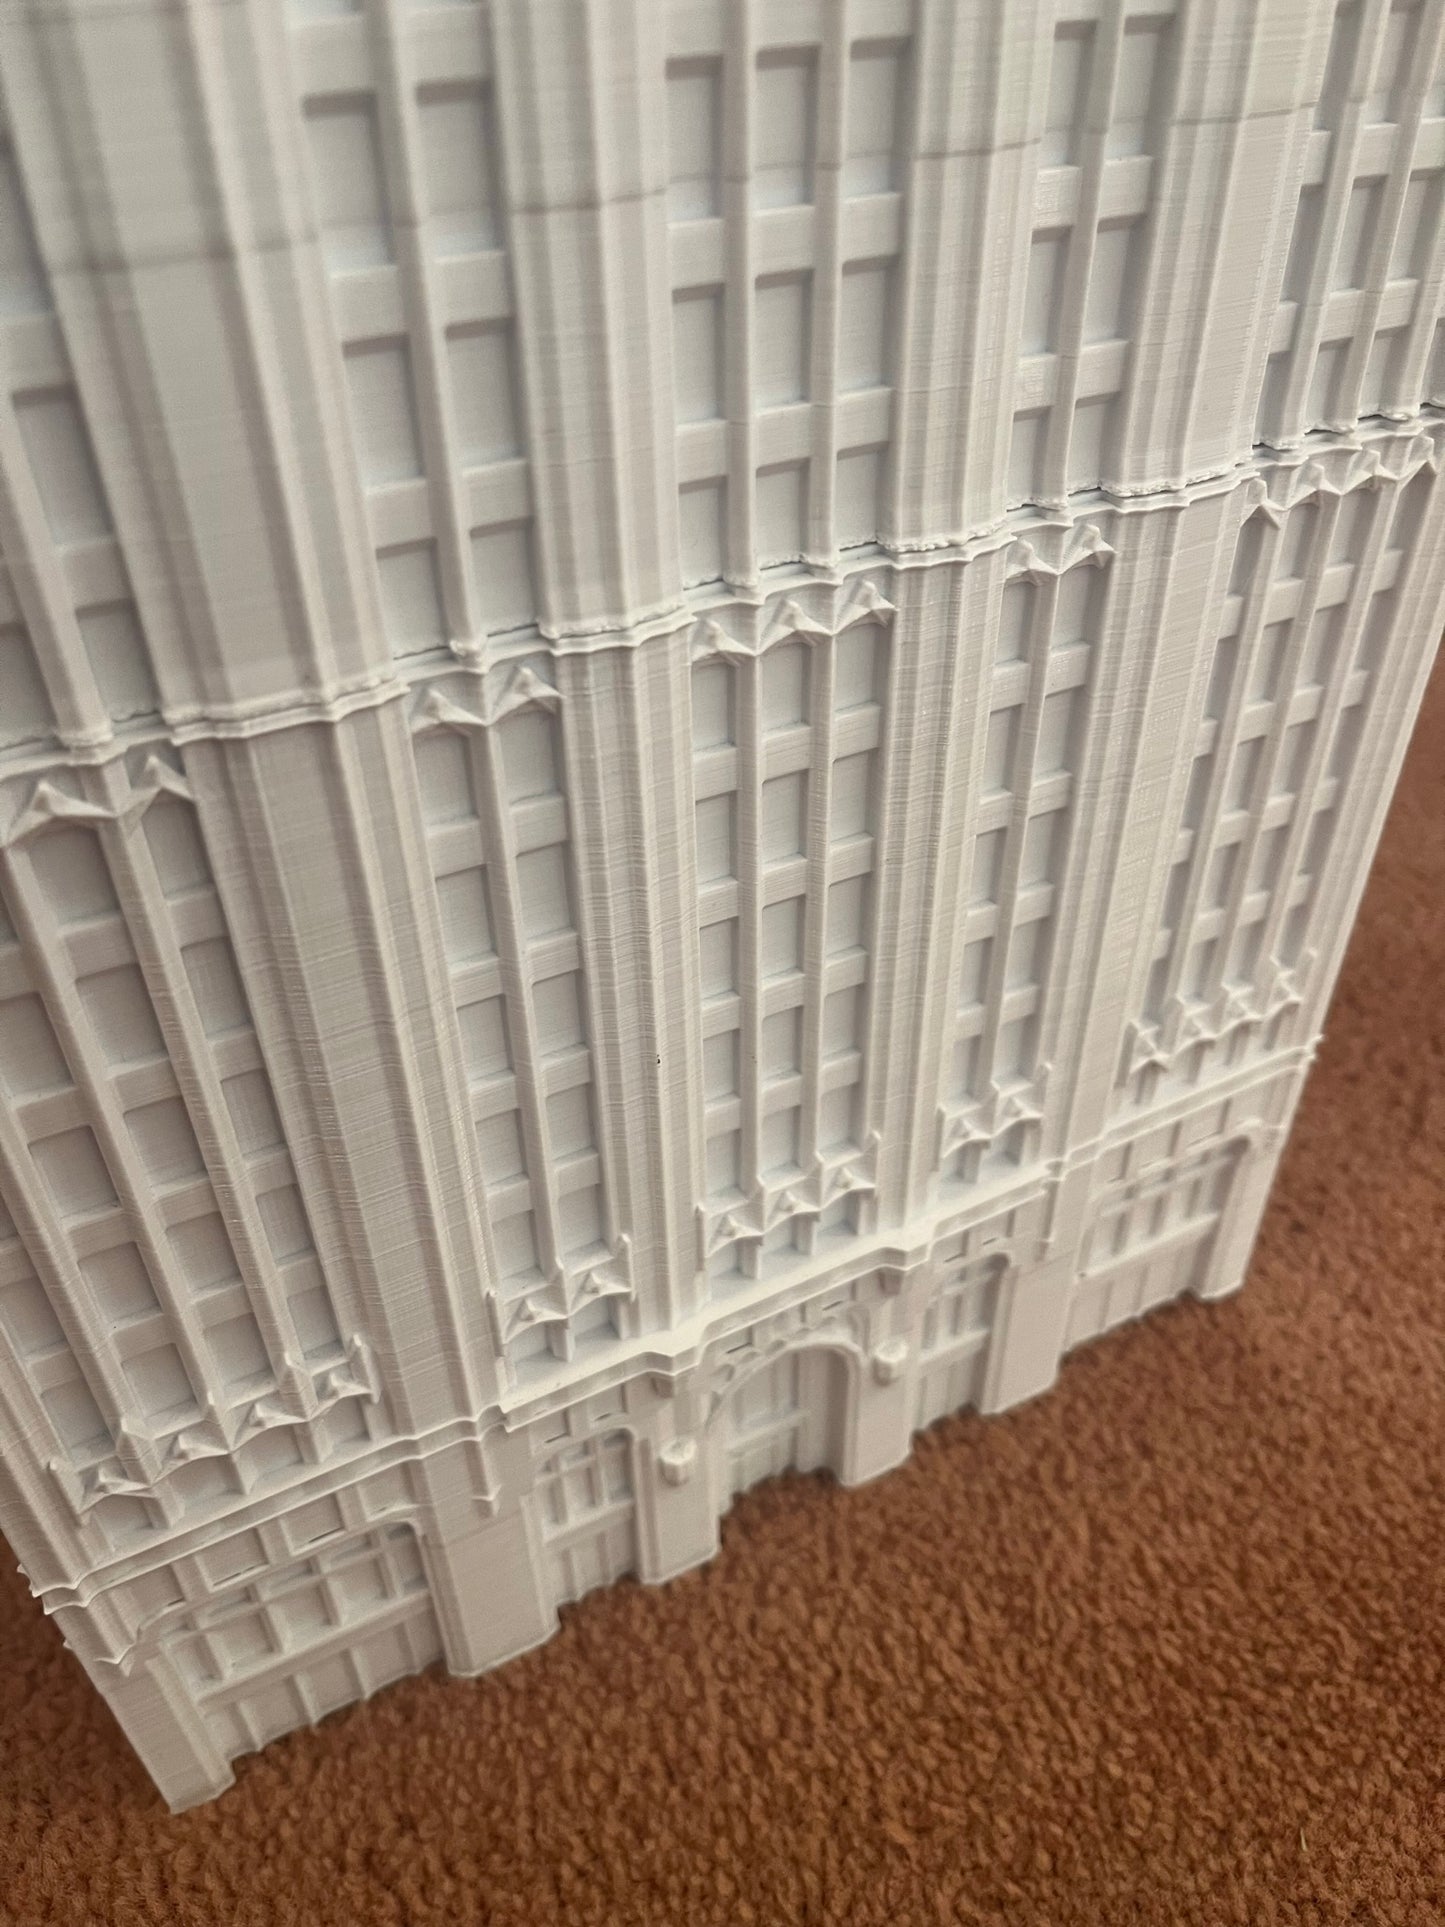 Extra Large Woolworth Building Model- 3D Printed